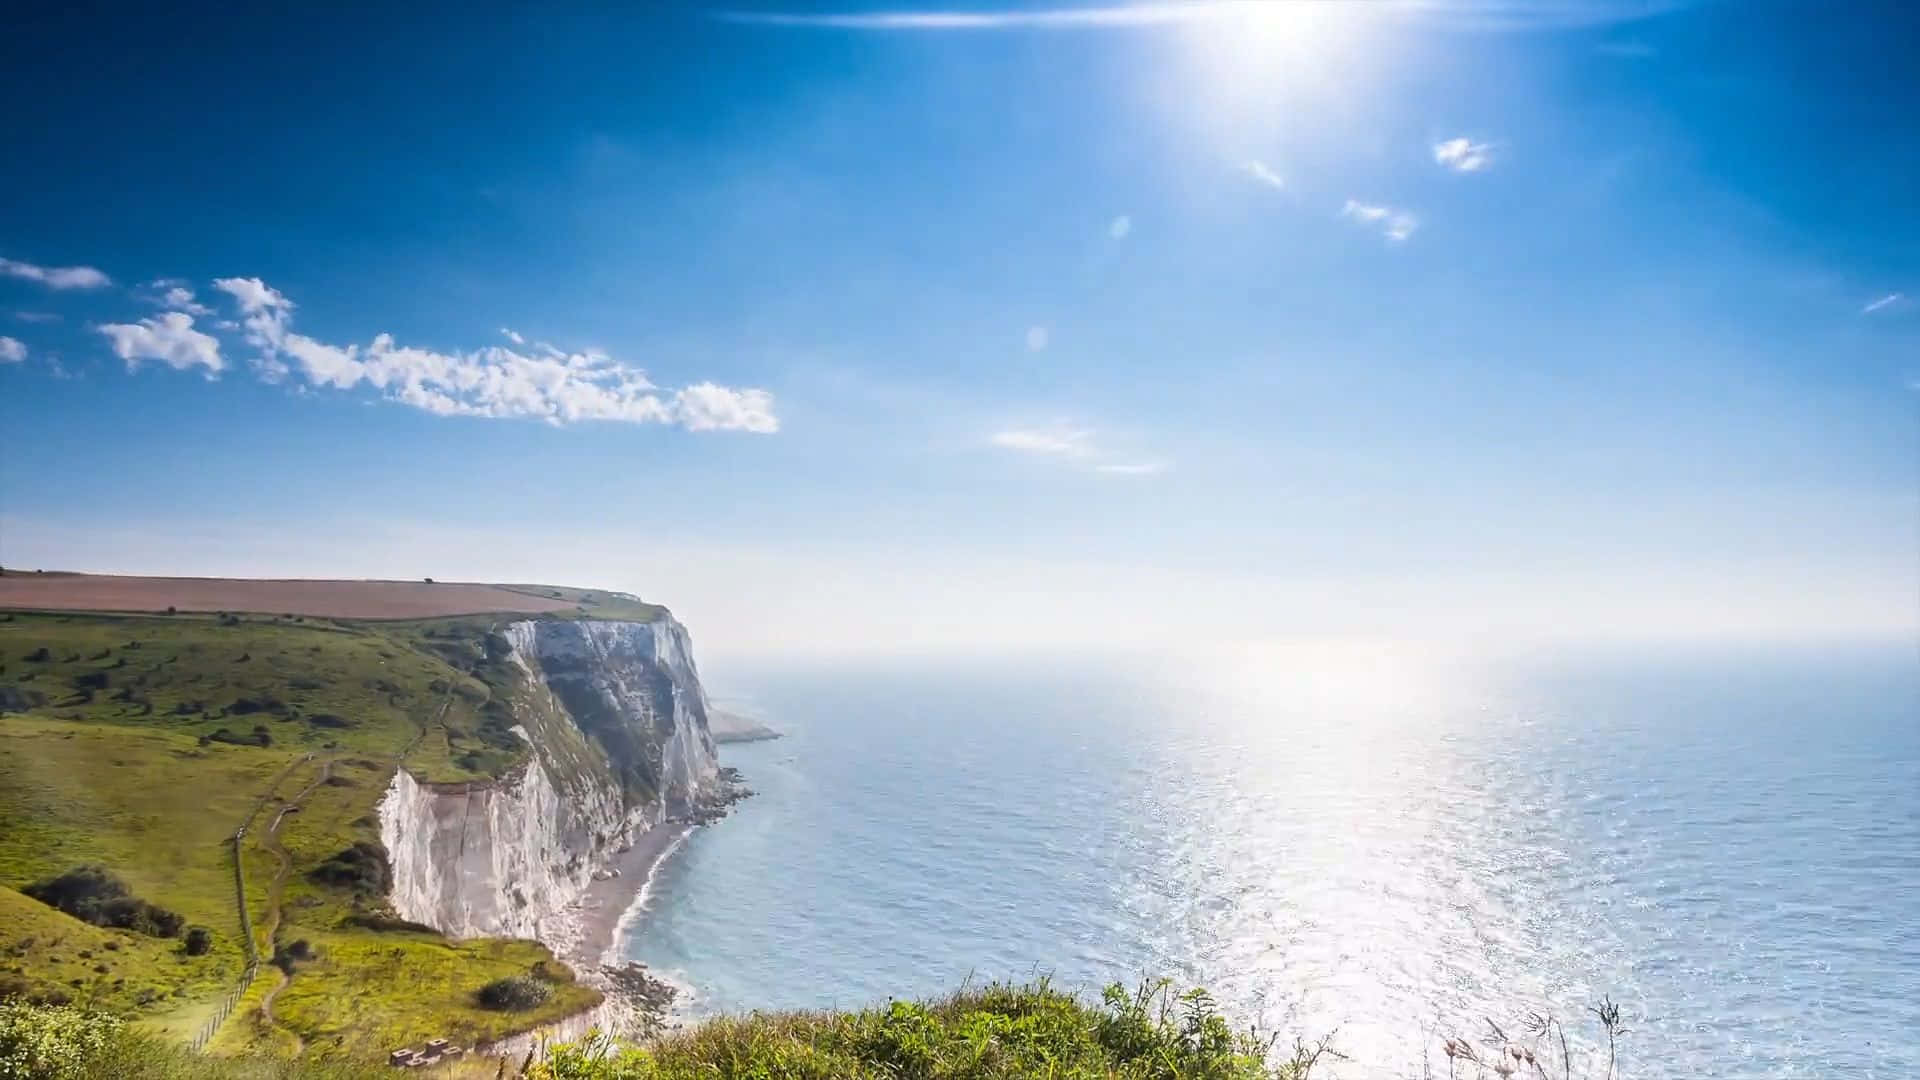 Ocean View At White Cliffs Of Dover Wallpaper